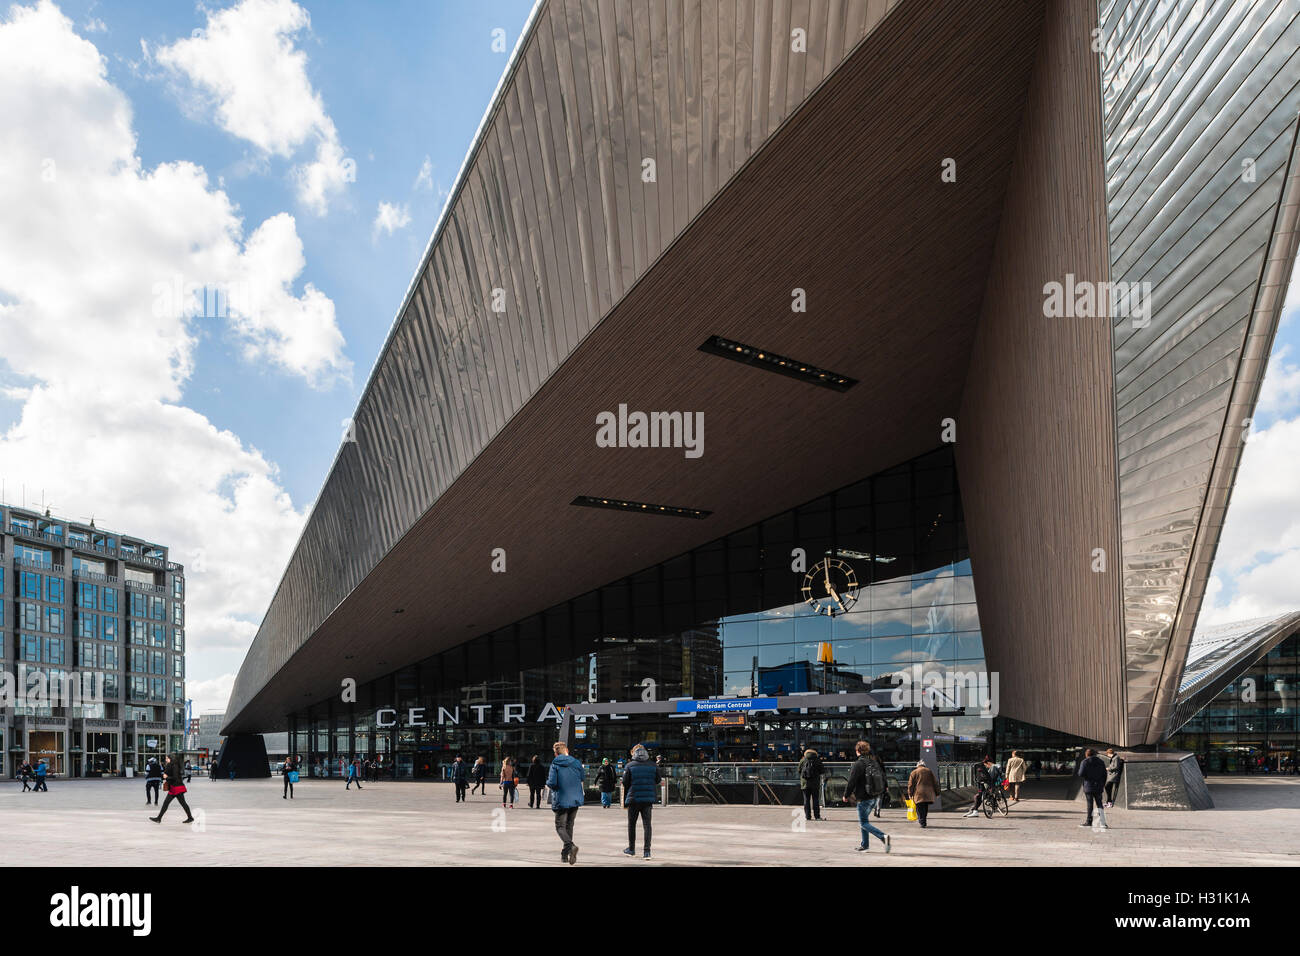 Elevation view of angular canopy showing metal cladding and wodden ceiling. Centraal Station, Rotterdam, Netherlands. Architect: Benthem Crouwel Architects + MVSA Architects + Wes, 2014. Stock Photo